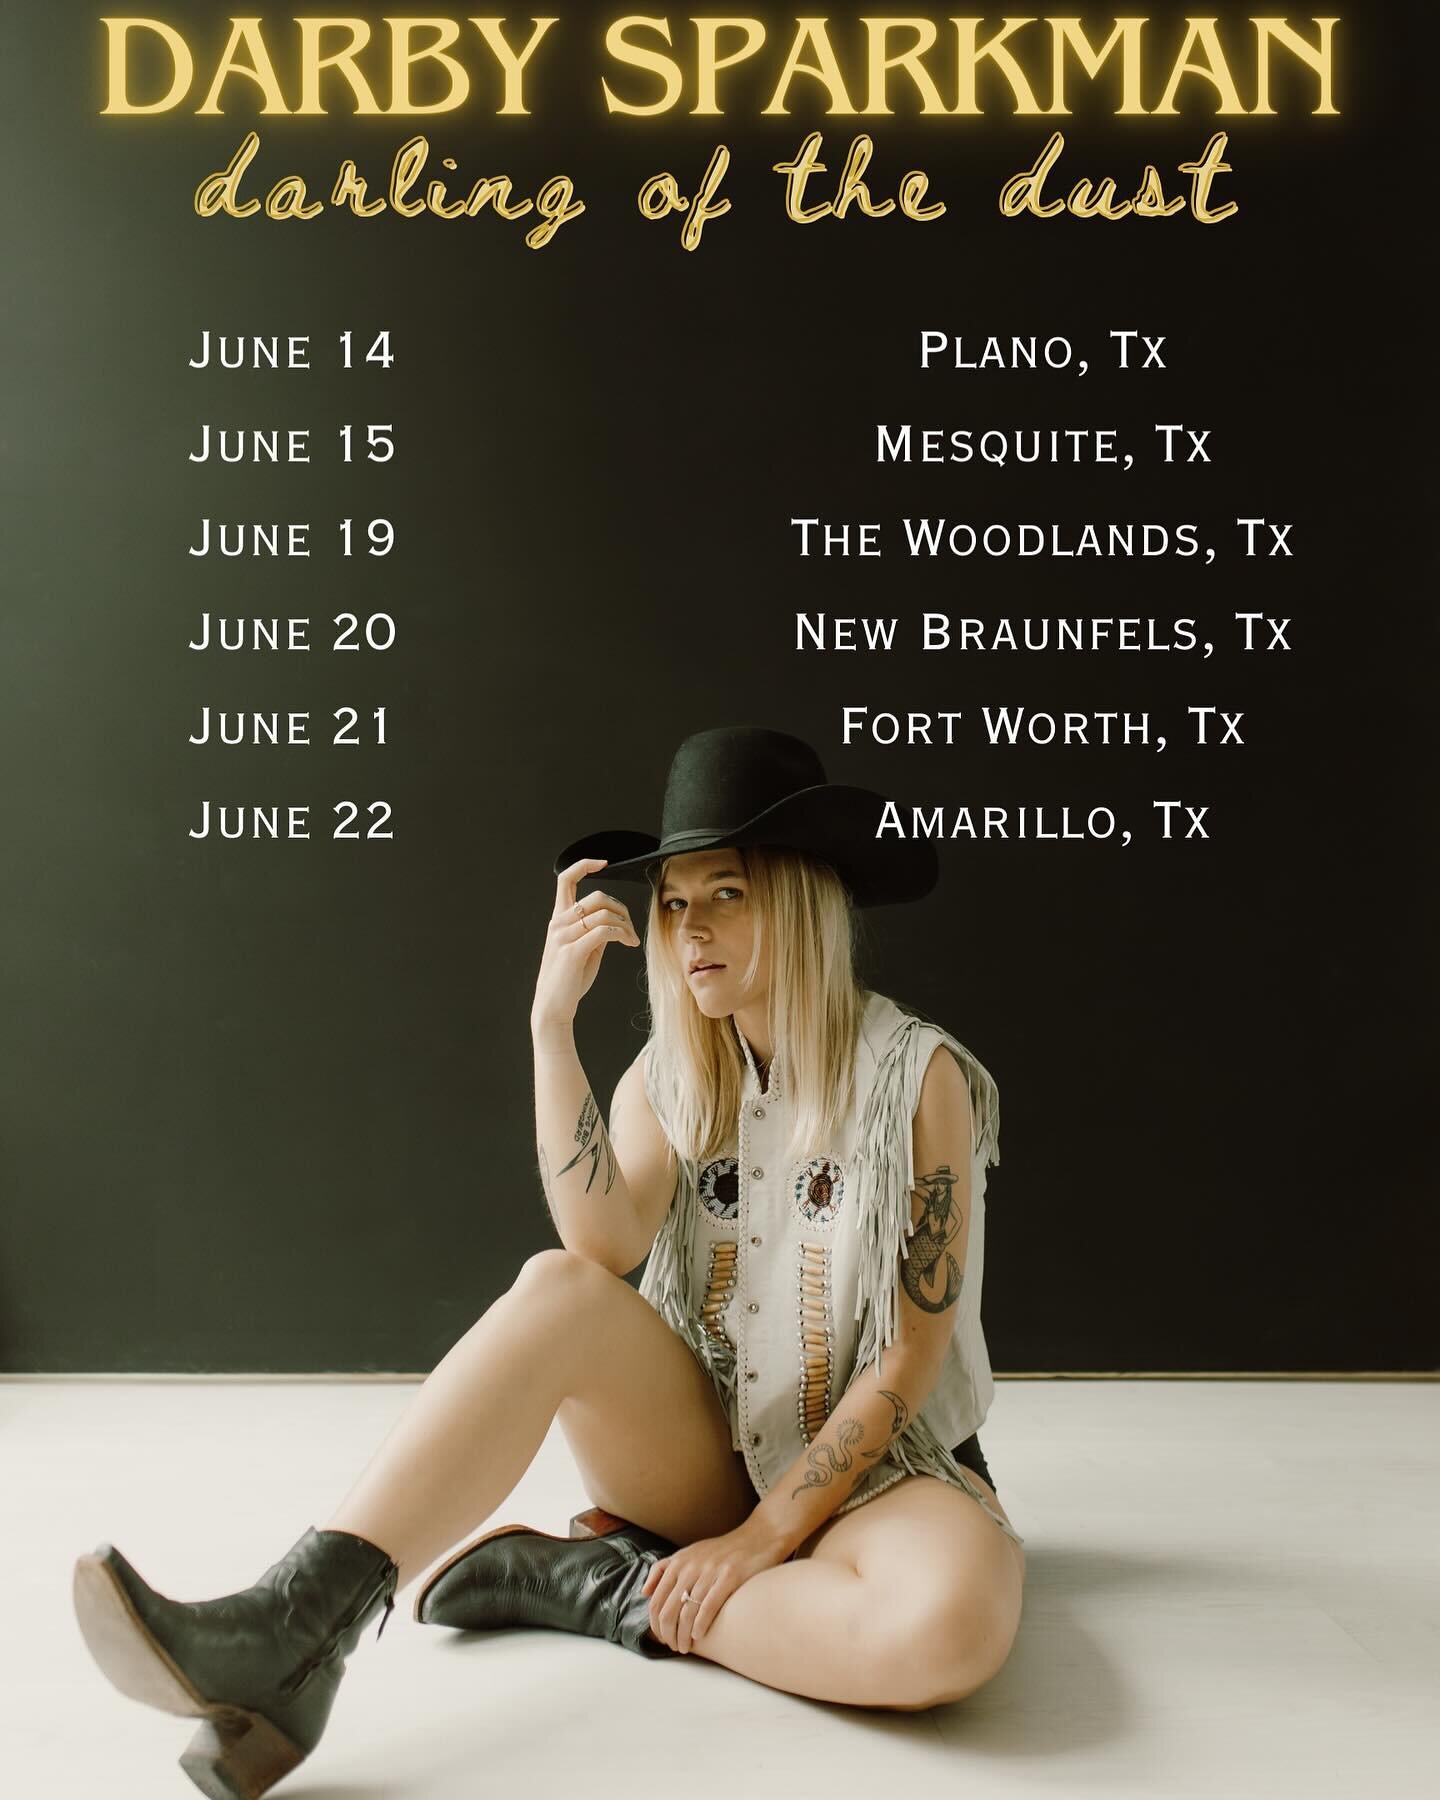 DARLING OF THE DUST TOUR kicks off in June (followed by a brief break so I can give birth) AND THEN BACK AGAIN IN THE FALL! 

June 14 | @love_and_war_in_plano w/ @court_patton
June 15 | @mesquiterodeo w/ @tylerbyrdmusic
June 19 | @doseydoebbq &ldquo;